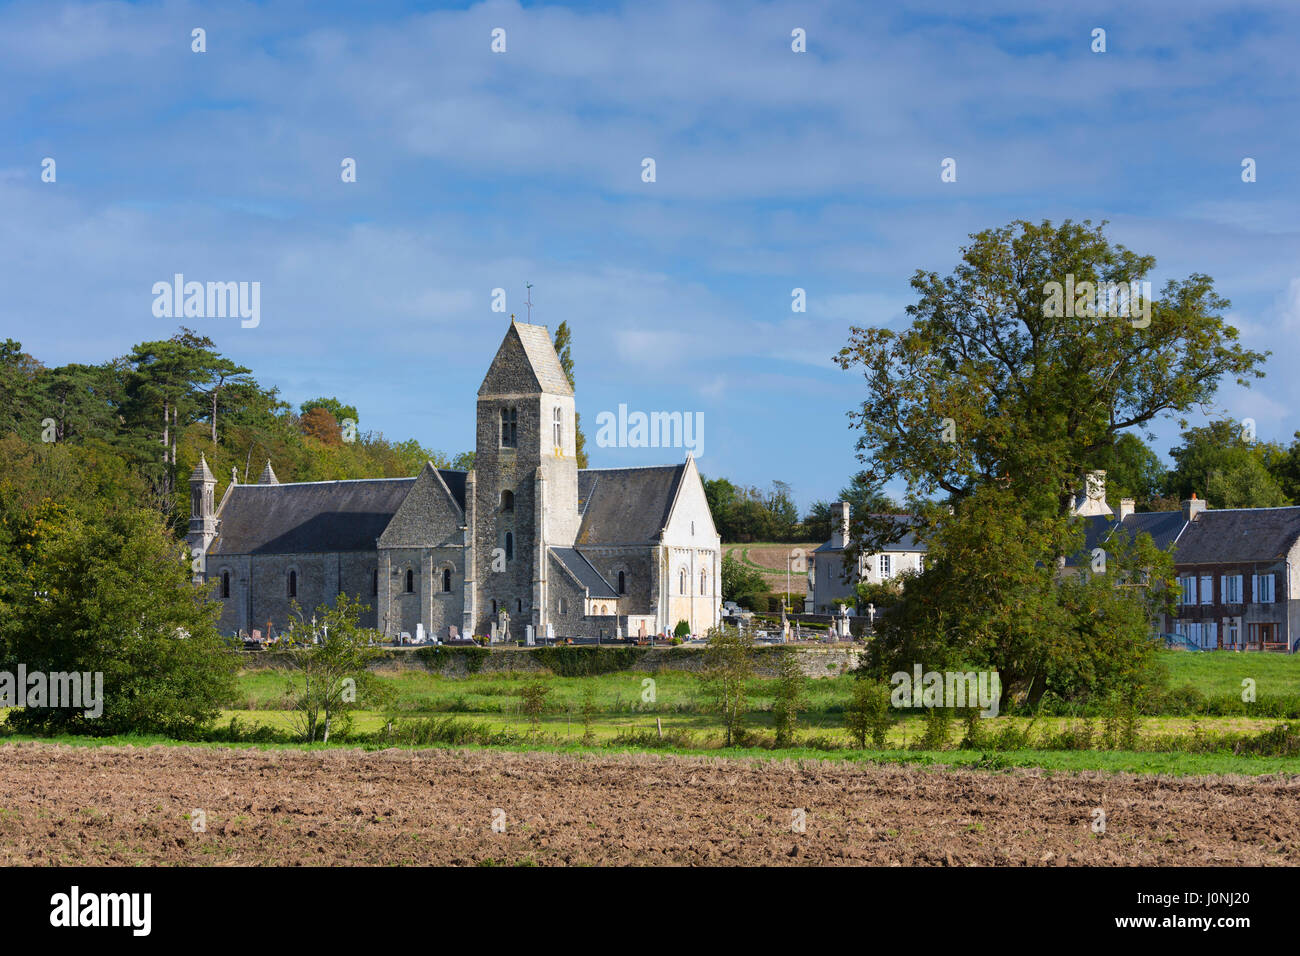 Ancient typical Norman style church and village at Vaux-sur-Aure in Normandy Stock Photo